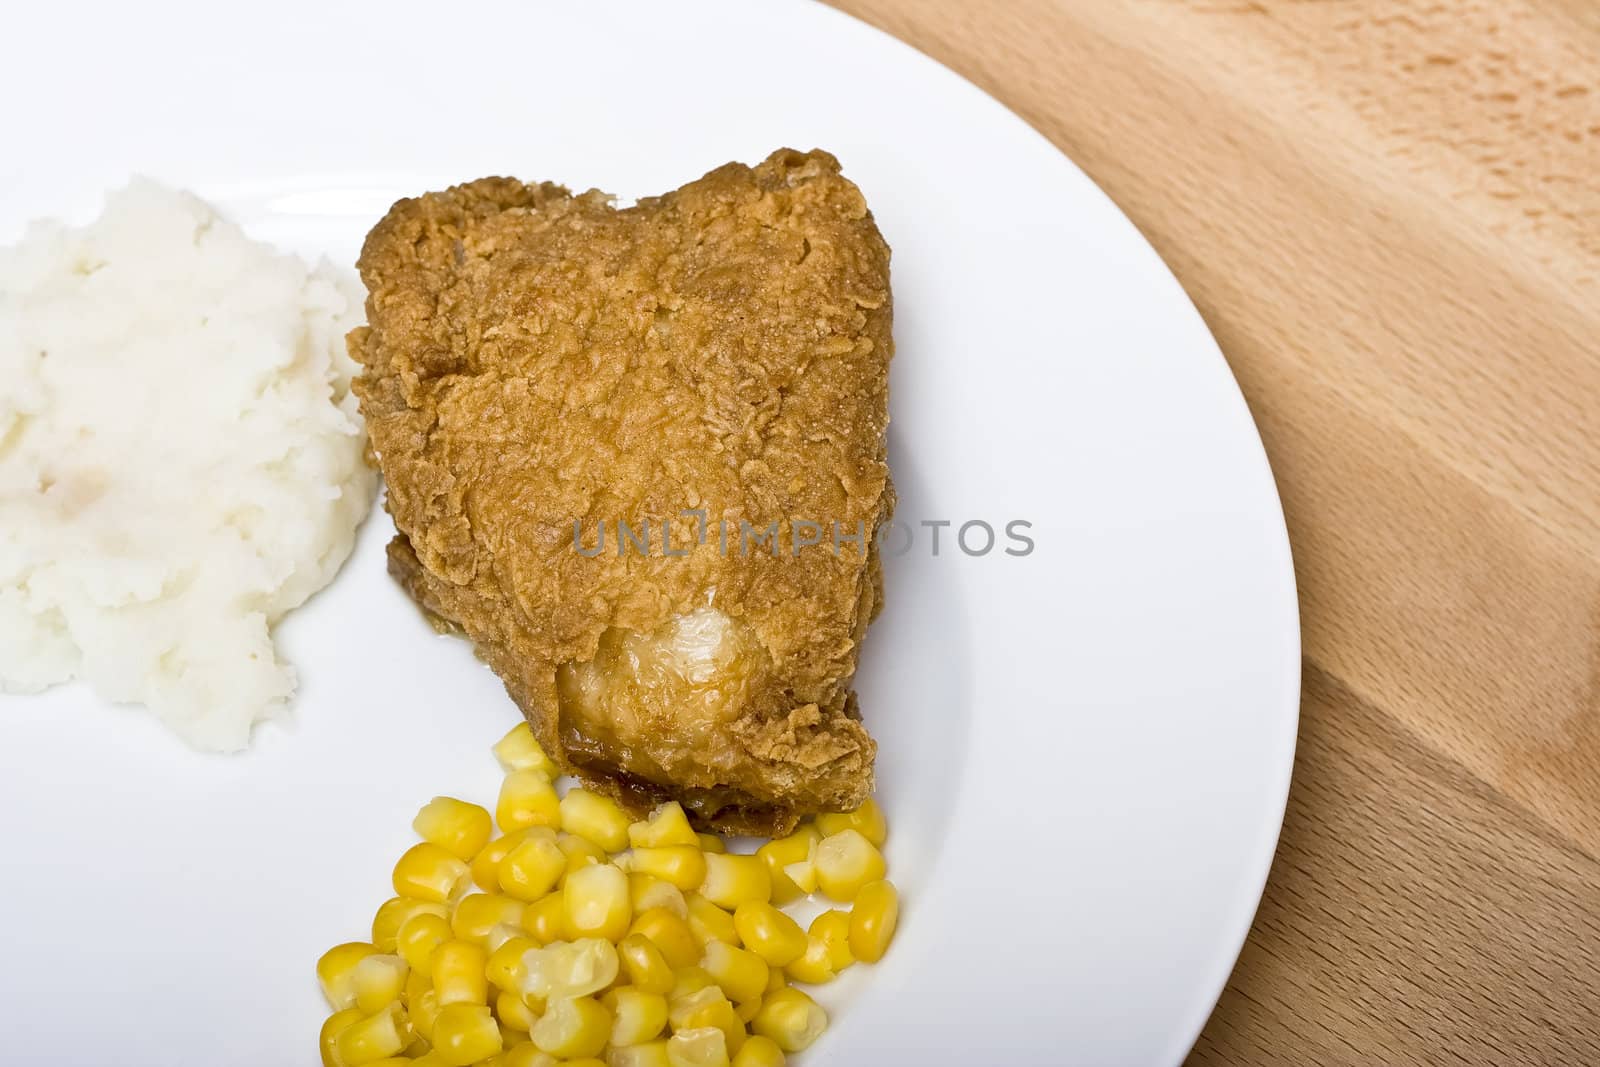 crispy golden chicken mashed potatoes and corn ready to eat